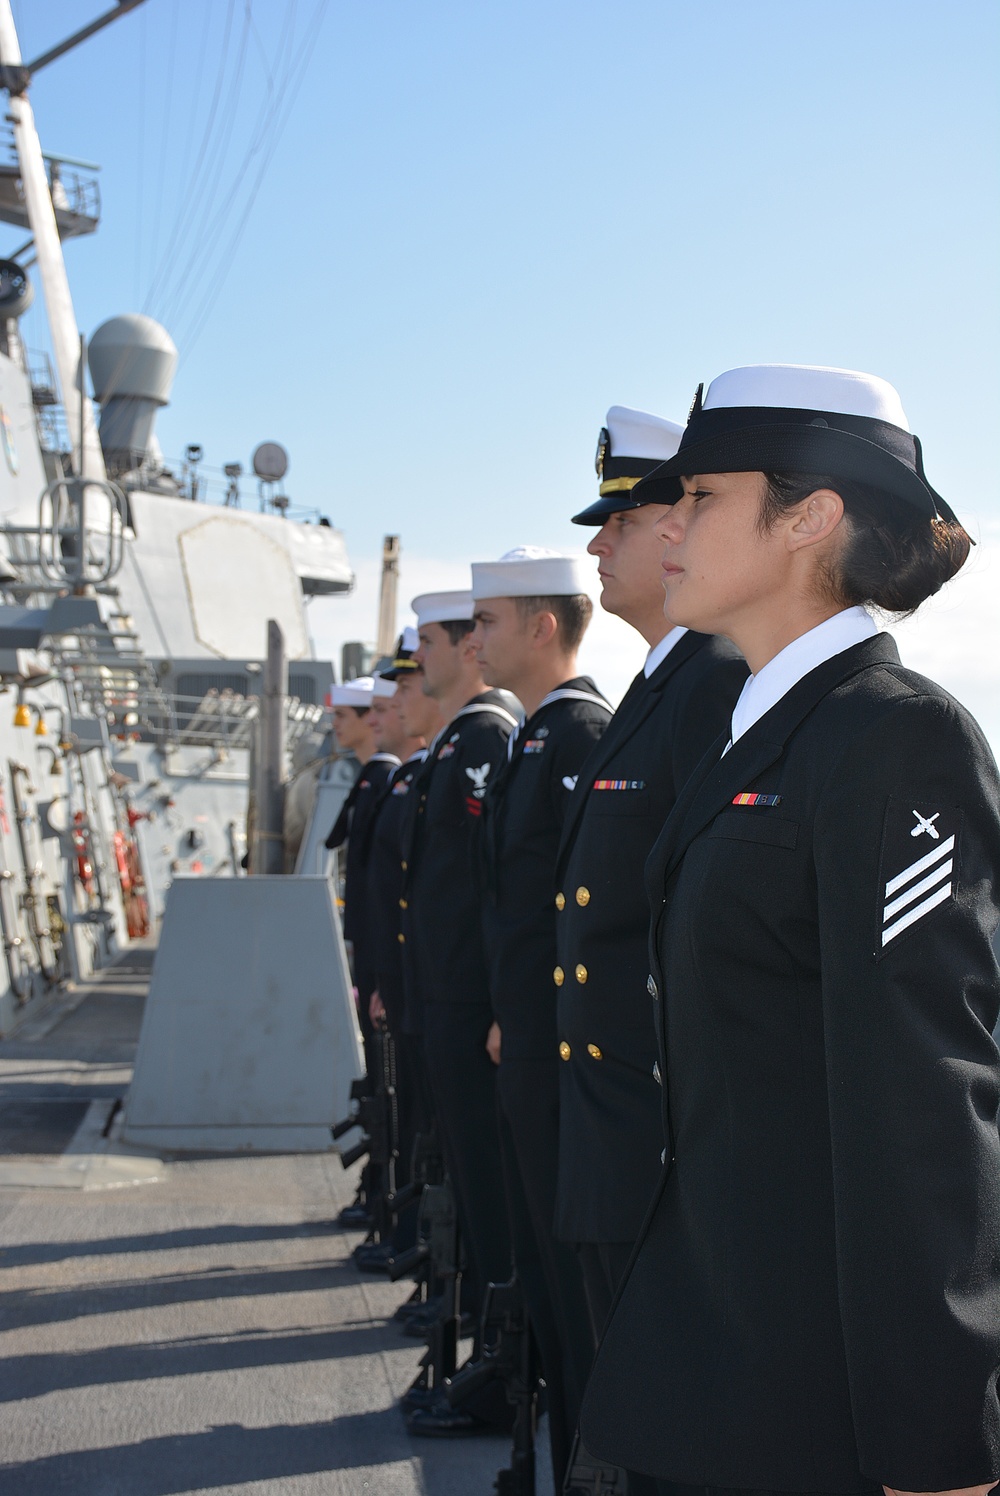 USS Cole conducts memorial for October 2000 terrorist attack